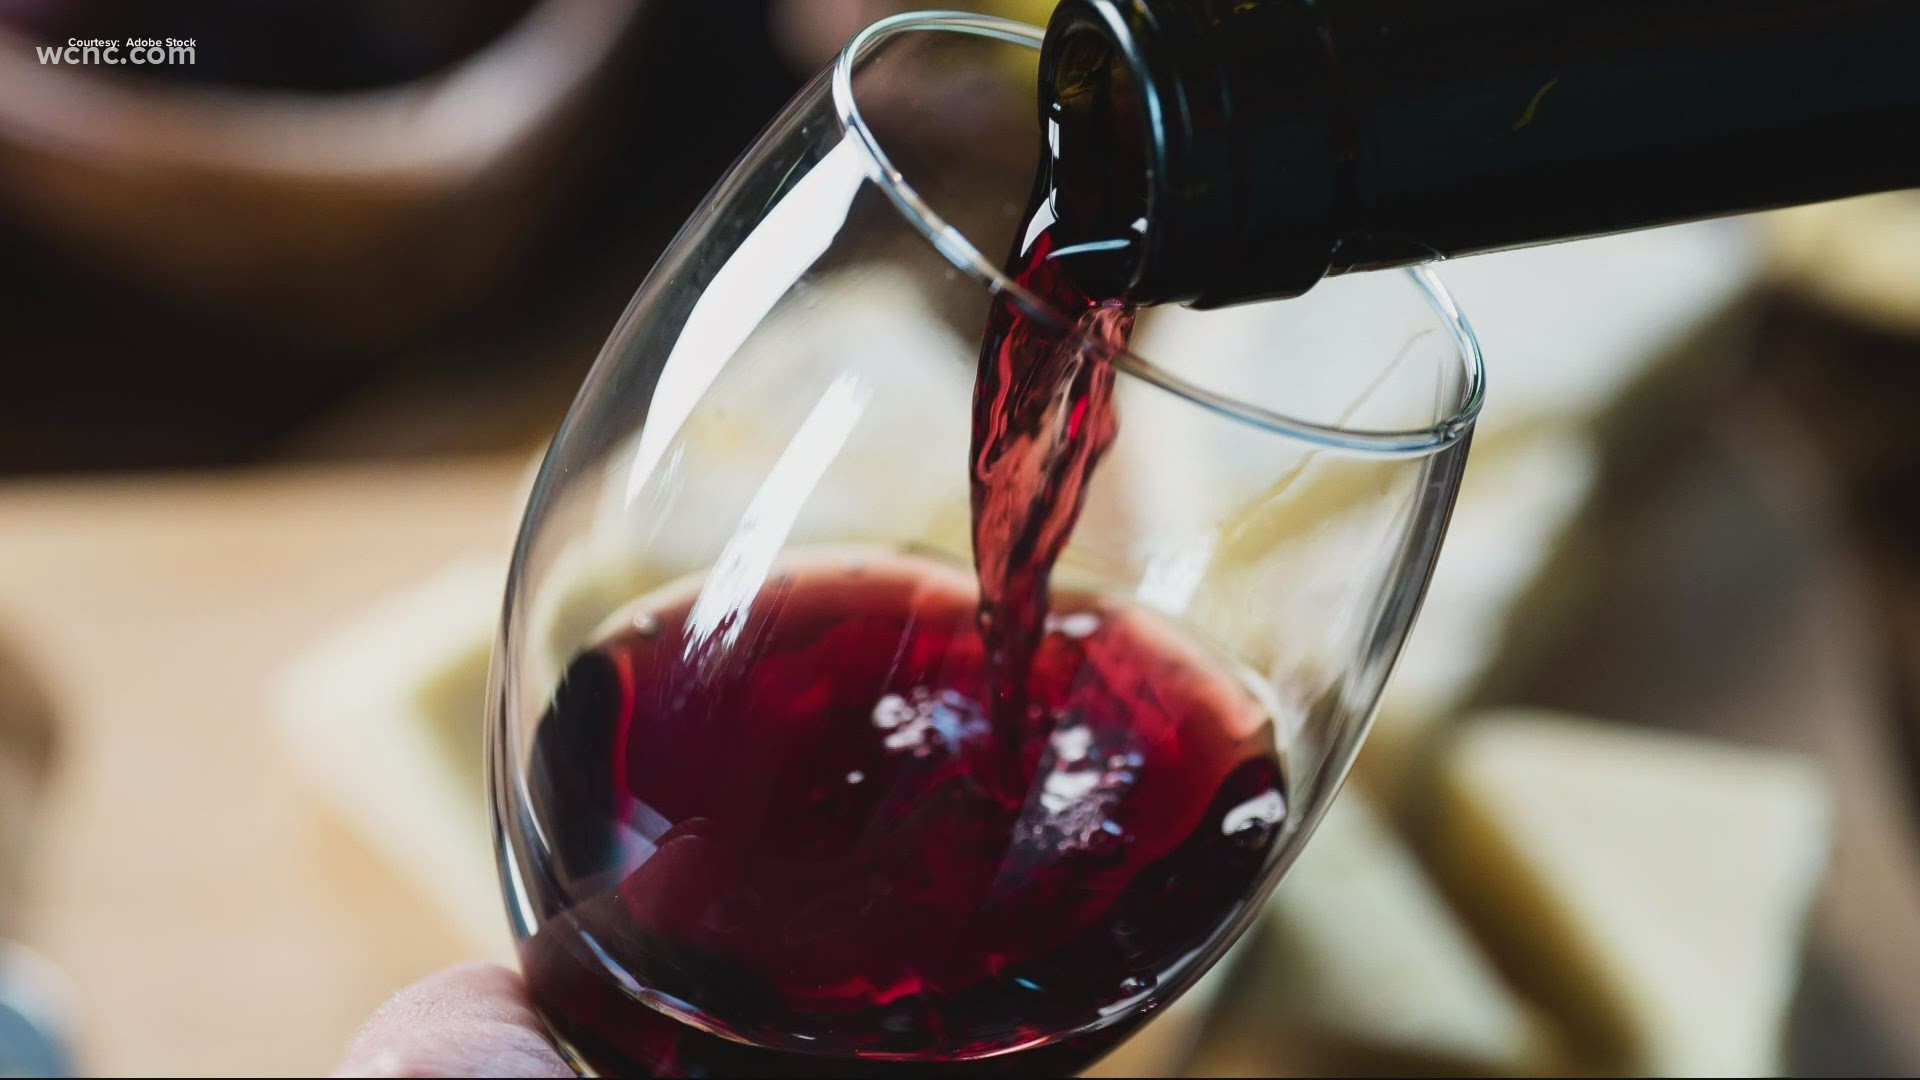 Tuesday is National Wine Day, and if you're a fan of red wine, you're in luck as it offers multiple health benefits.